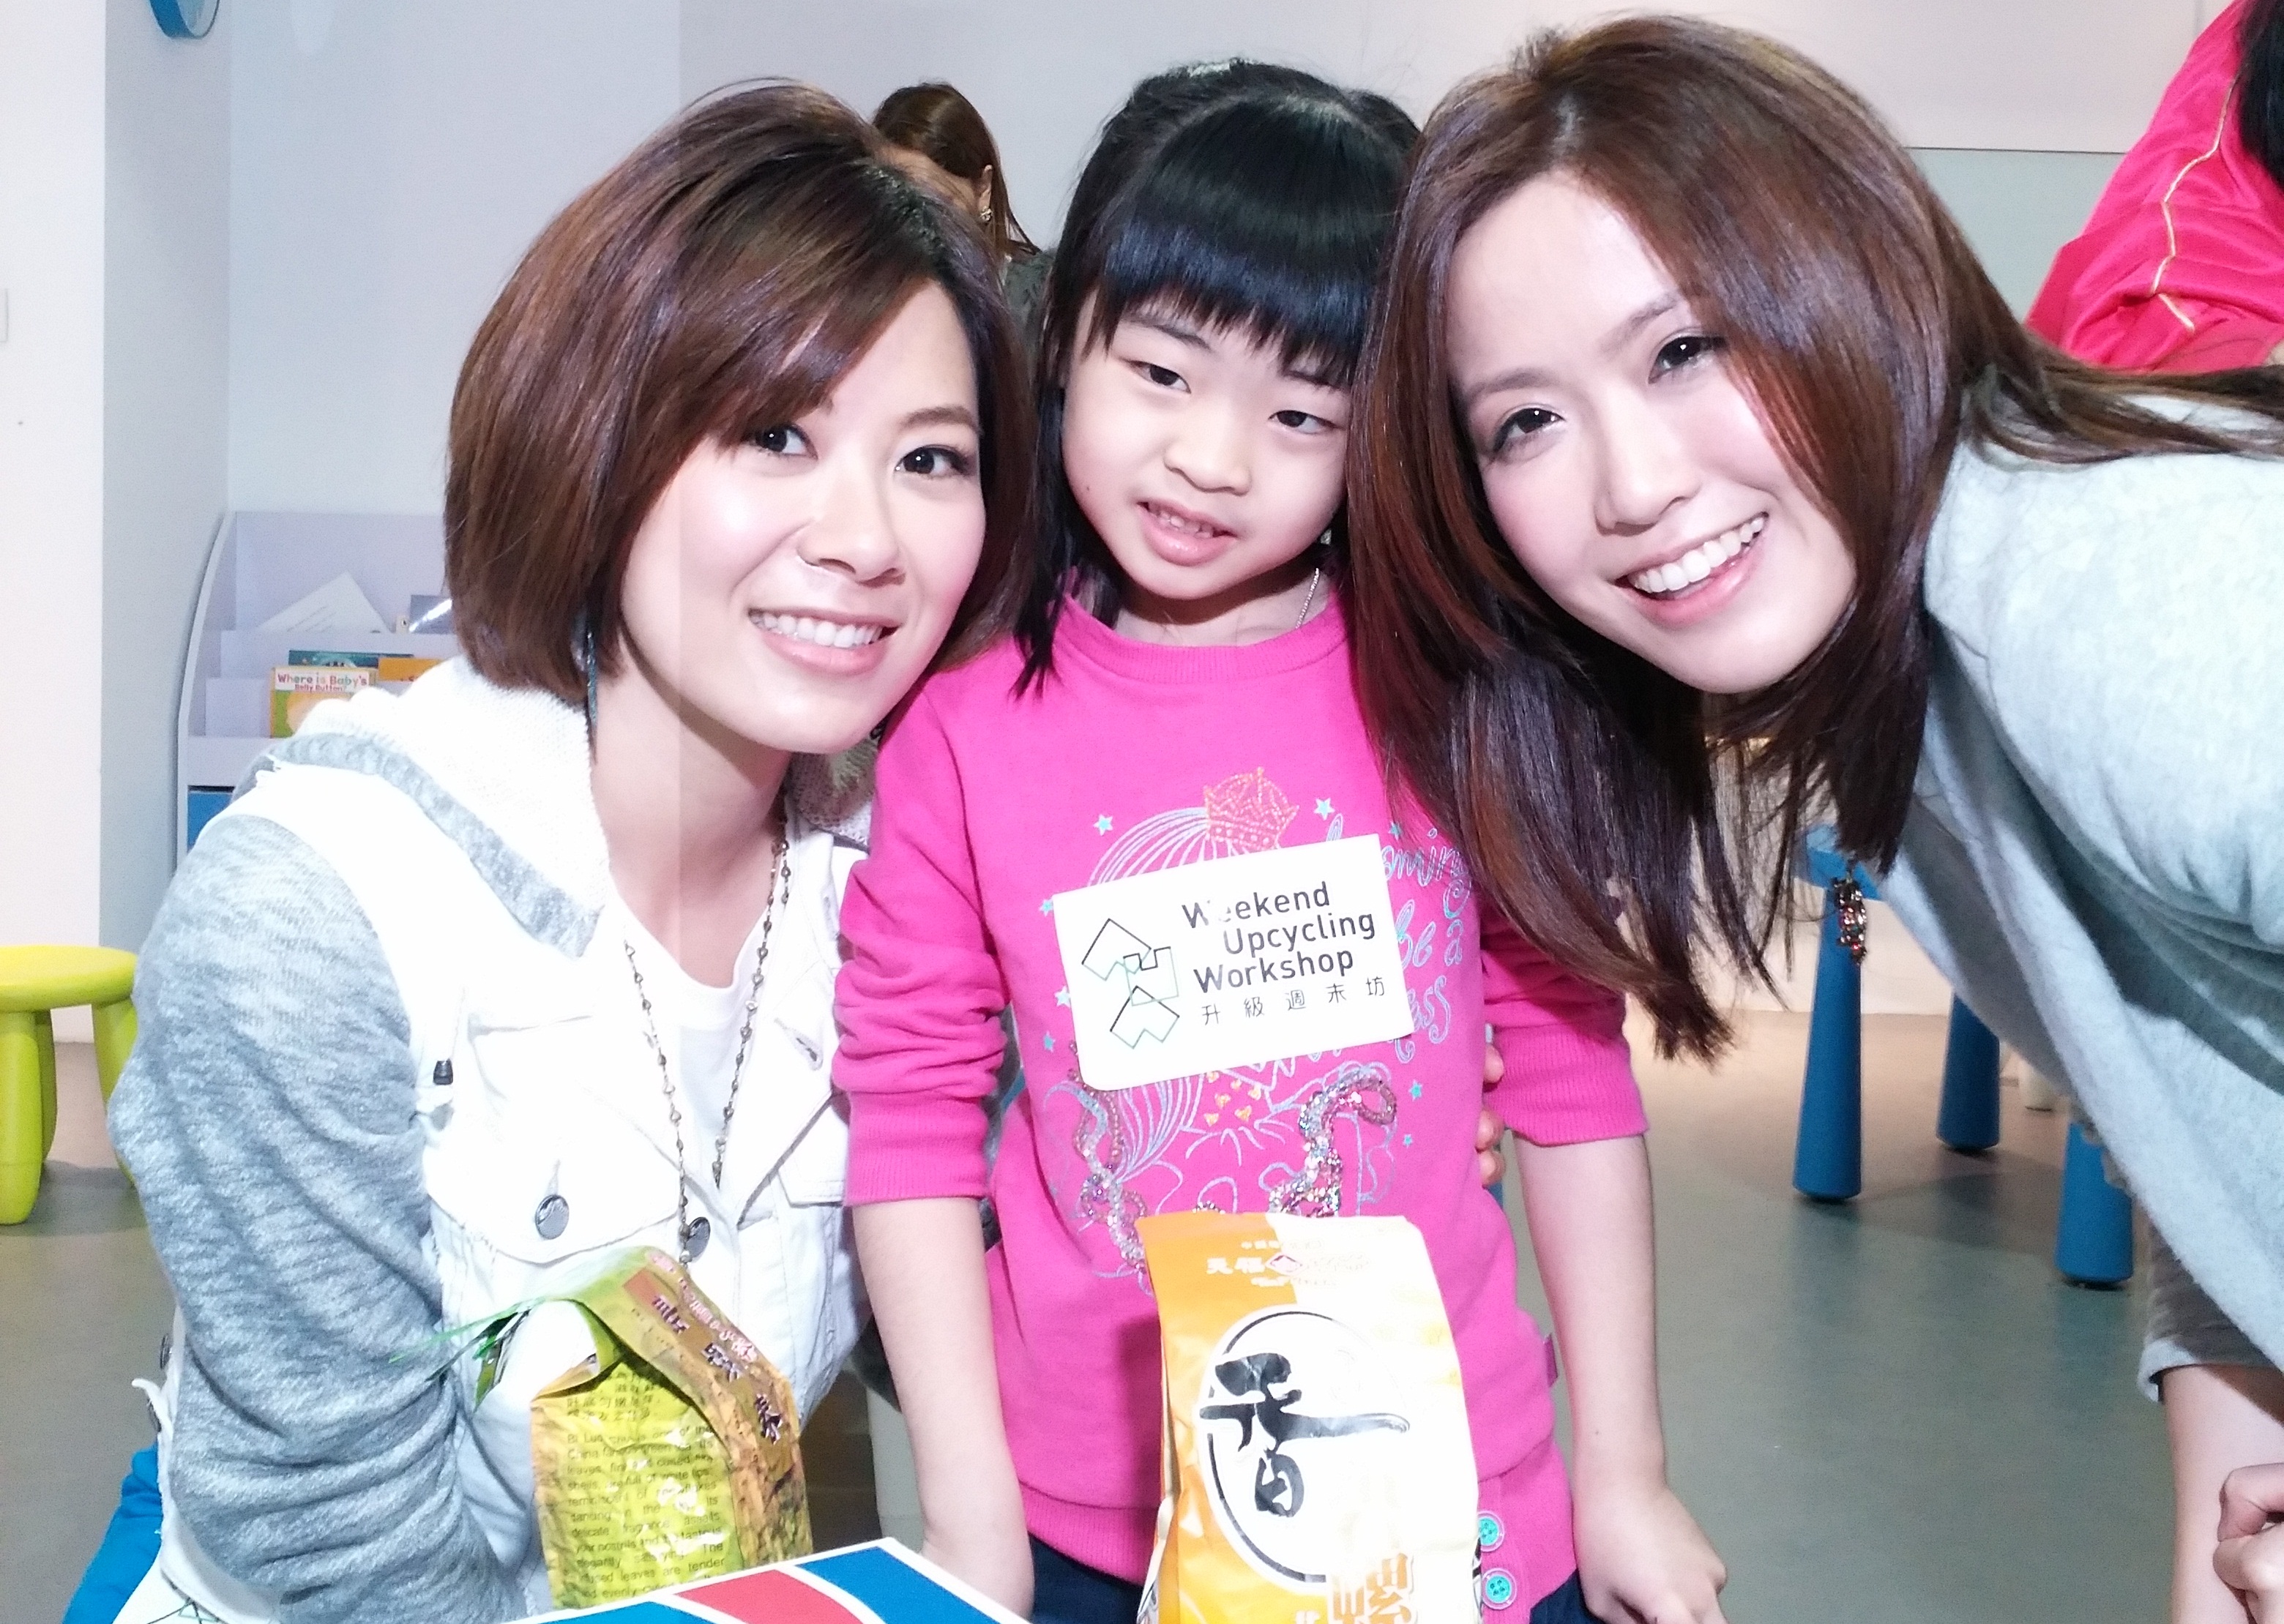 Robynn & Kendy Jammed with Heep Hong Children at Autism Rocks Held by Weekend Upcycling Workshop